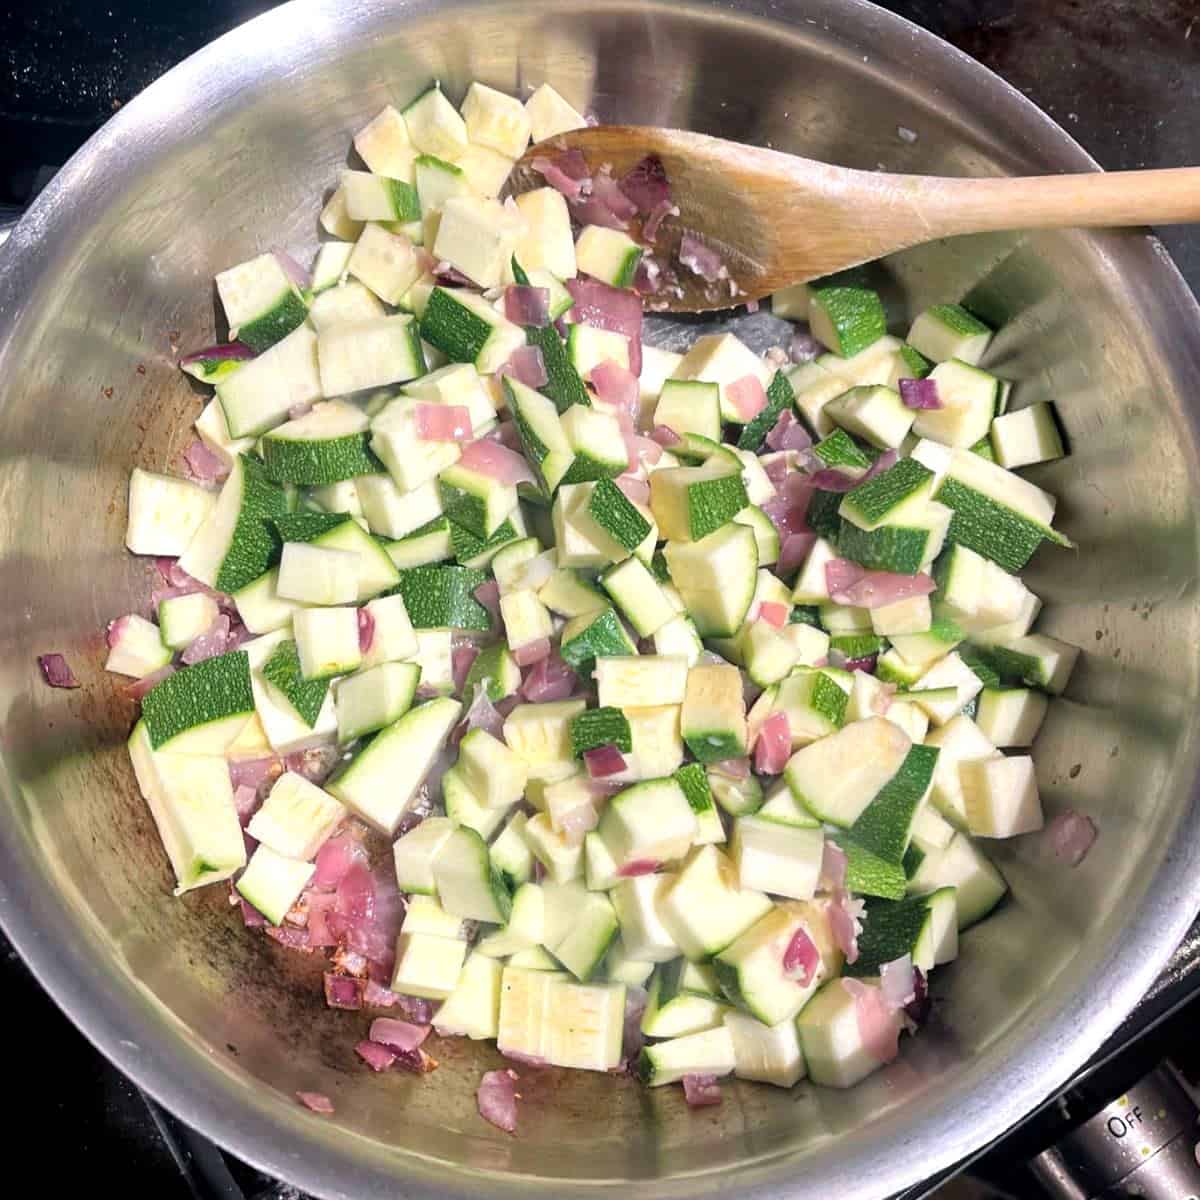 Zucchini added to onions and garlic in saute pan.